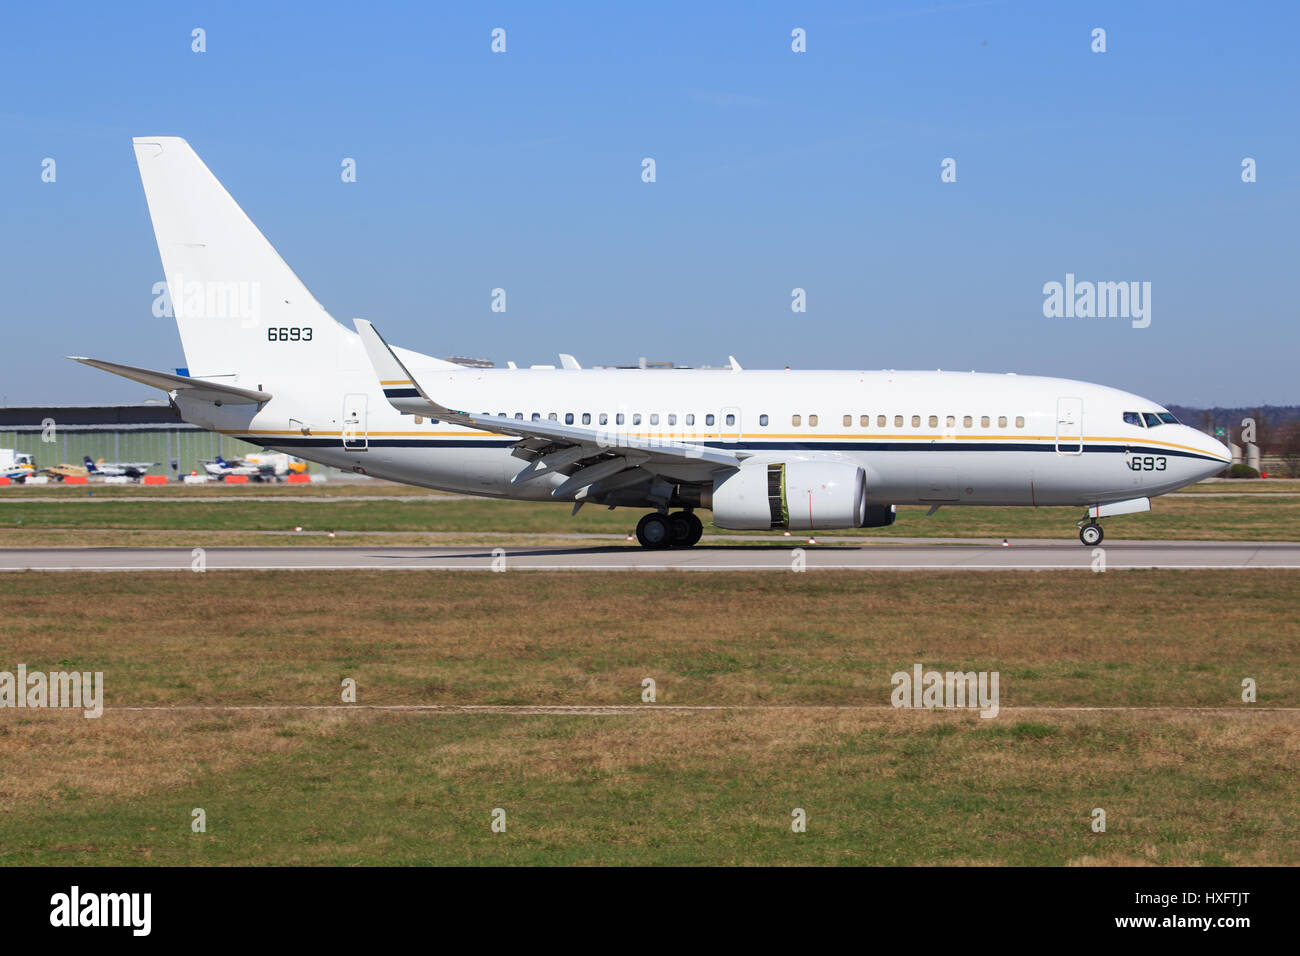 Stuttgart/Germany March 13, 2017: Boeing VC-32A from USA Airforce at Stuttgart Airport. Stock Photo